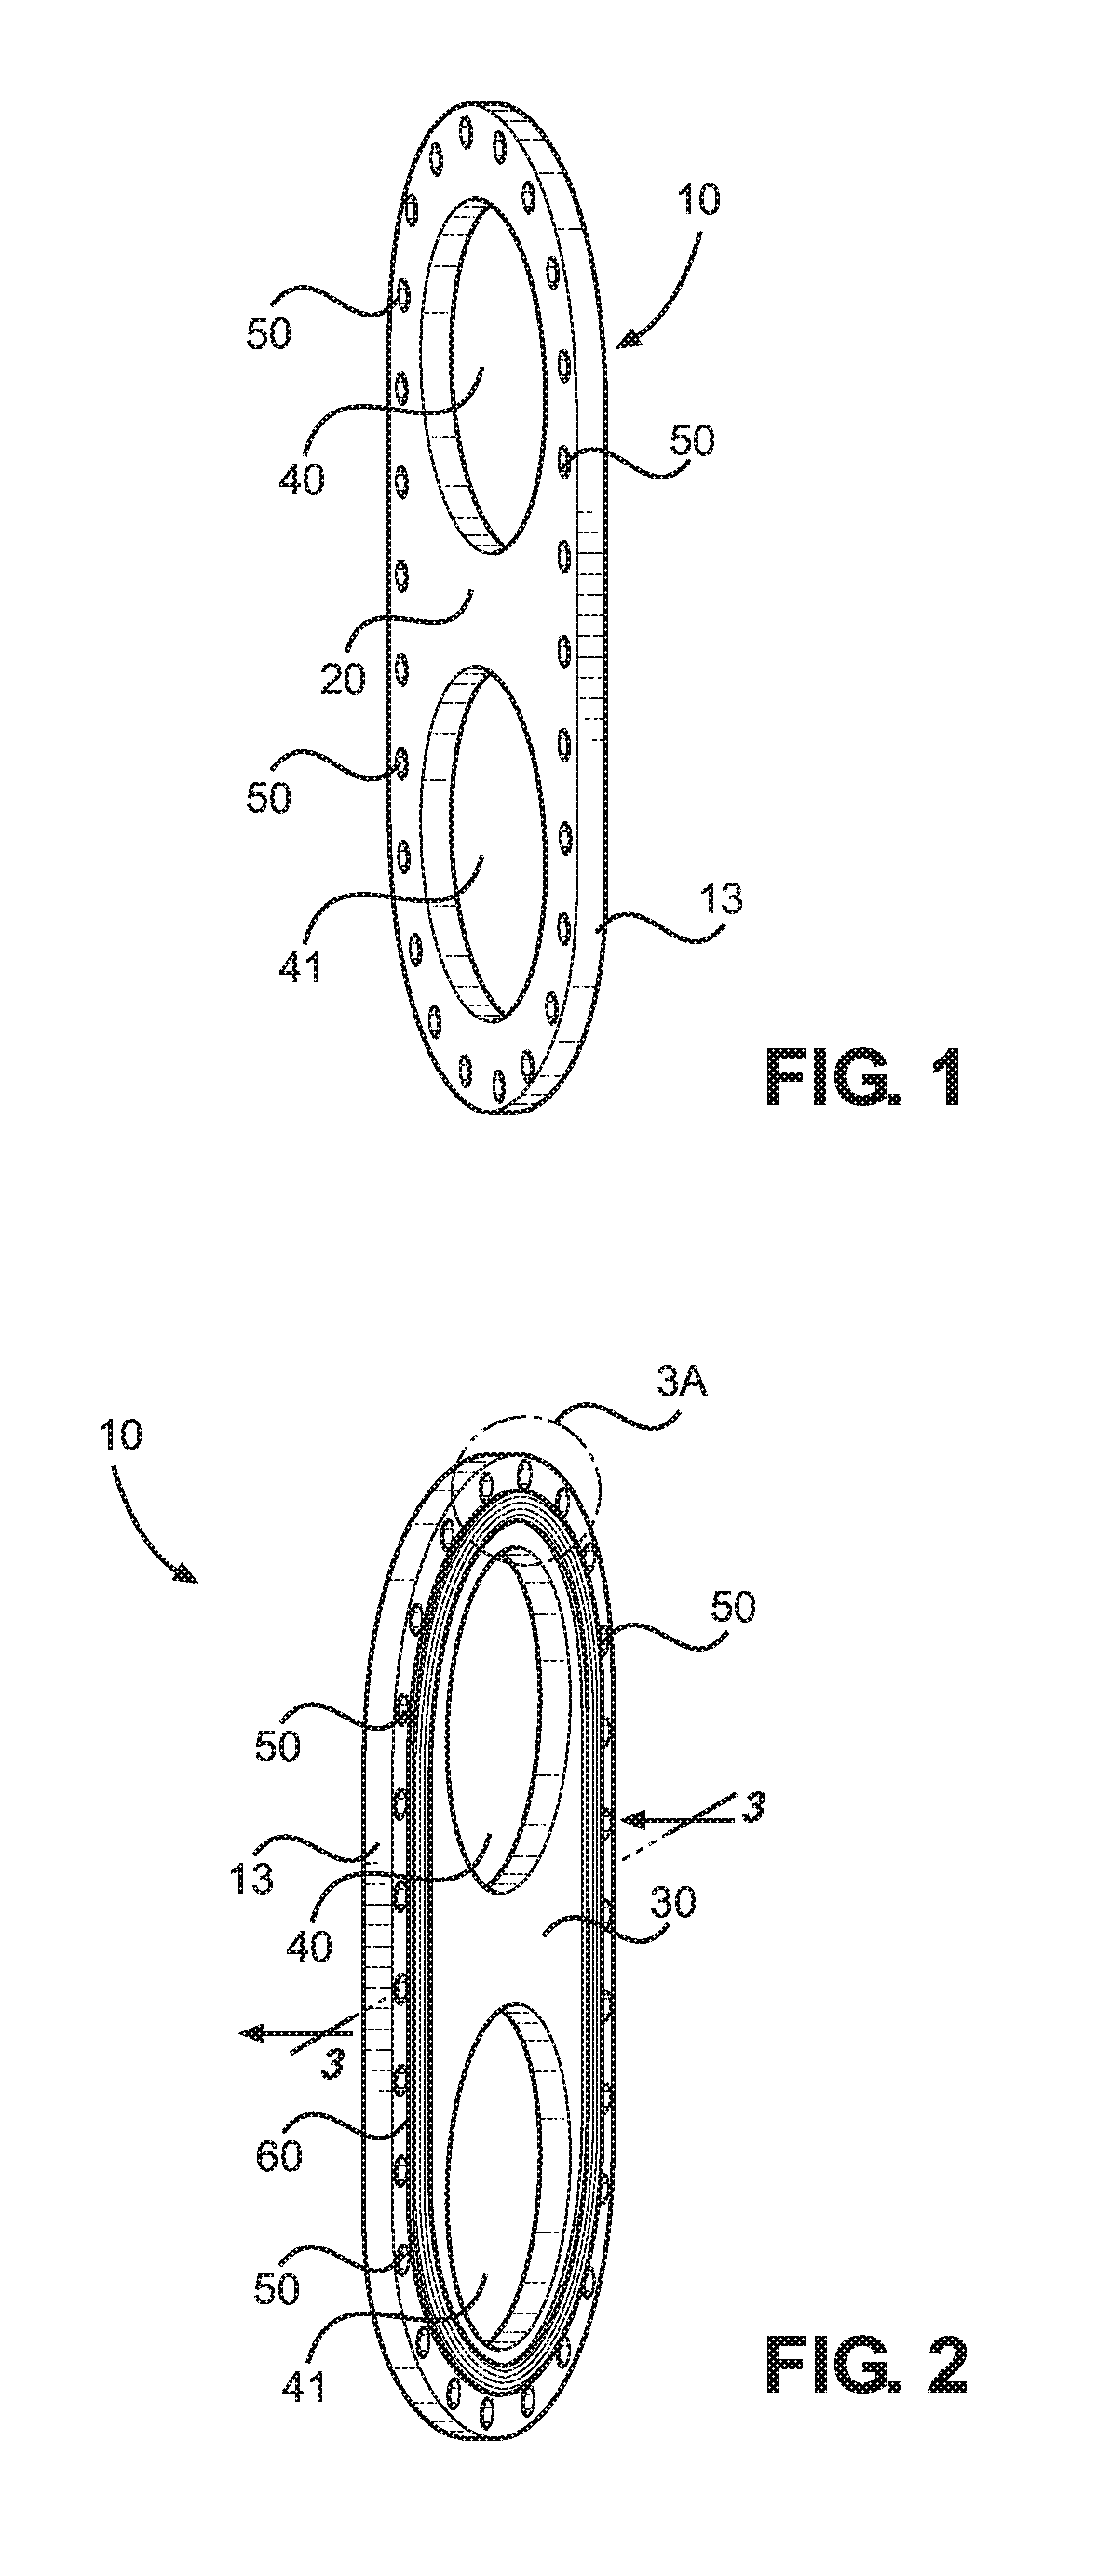 Flange Assembly for Heater Treaters and Other Vessels